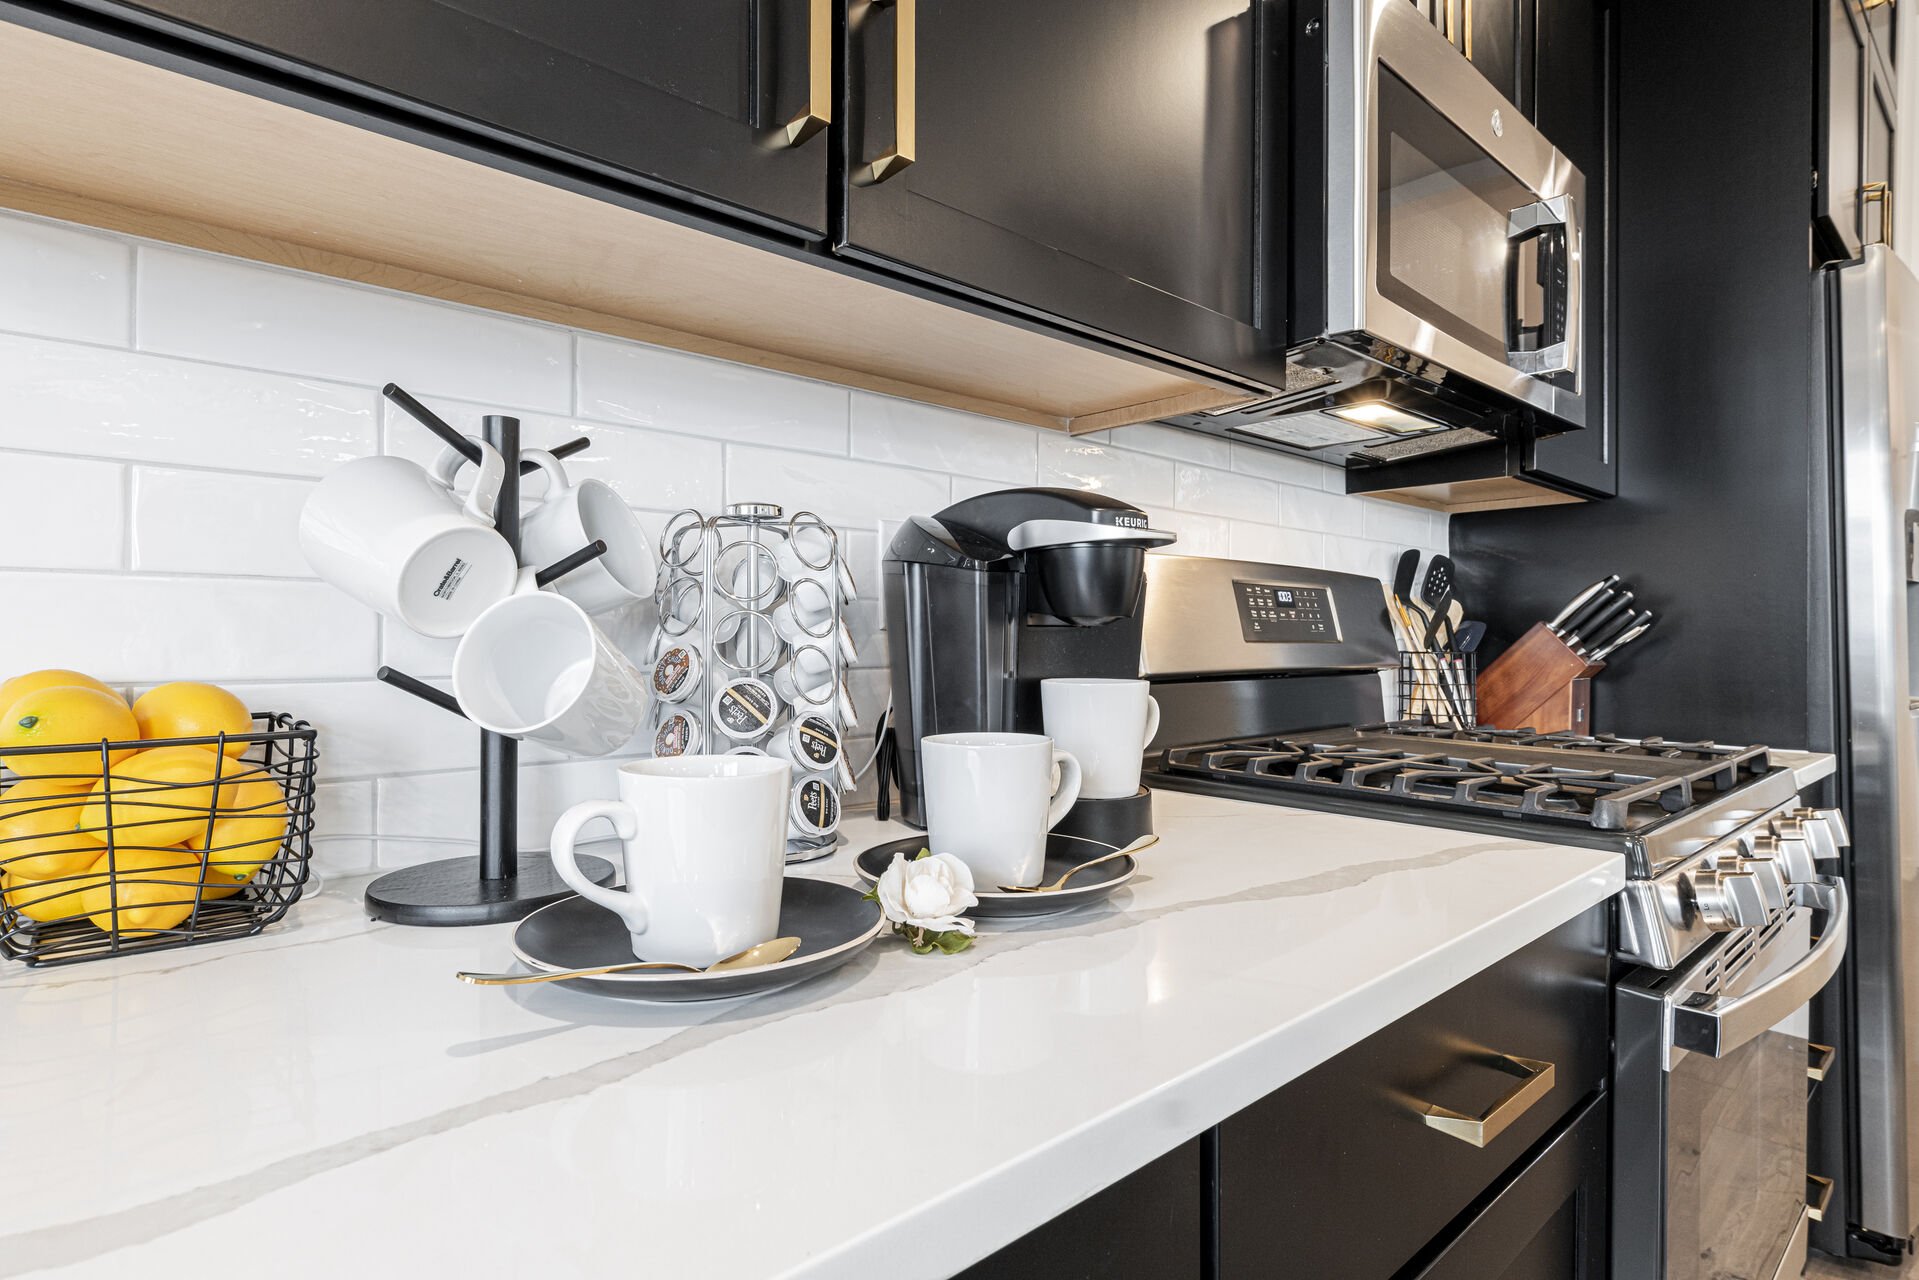 Keurig coffee maker to start your day